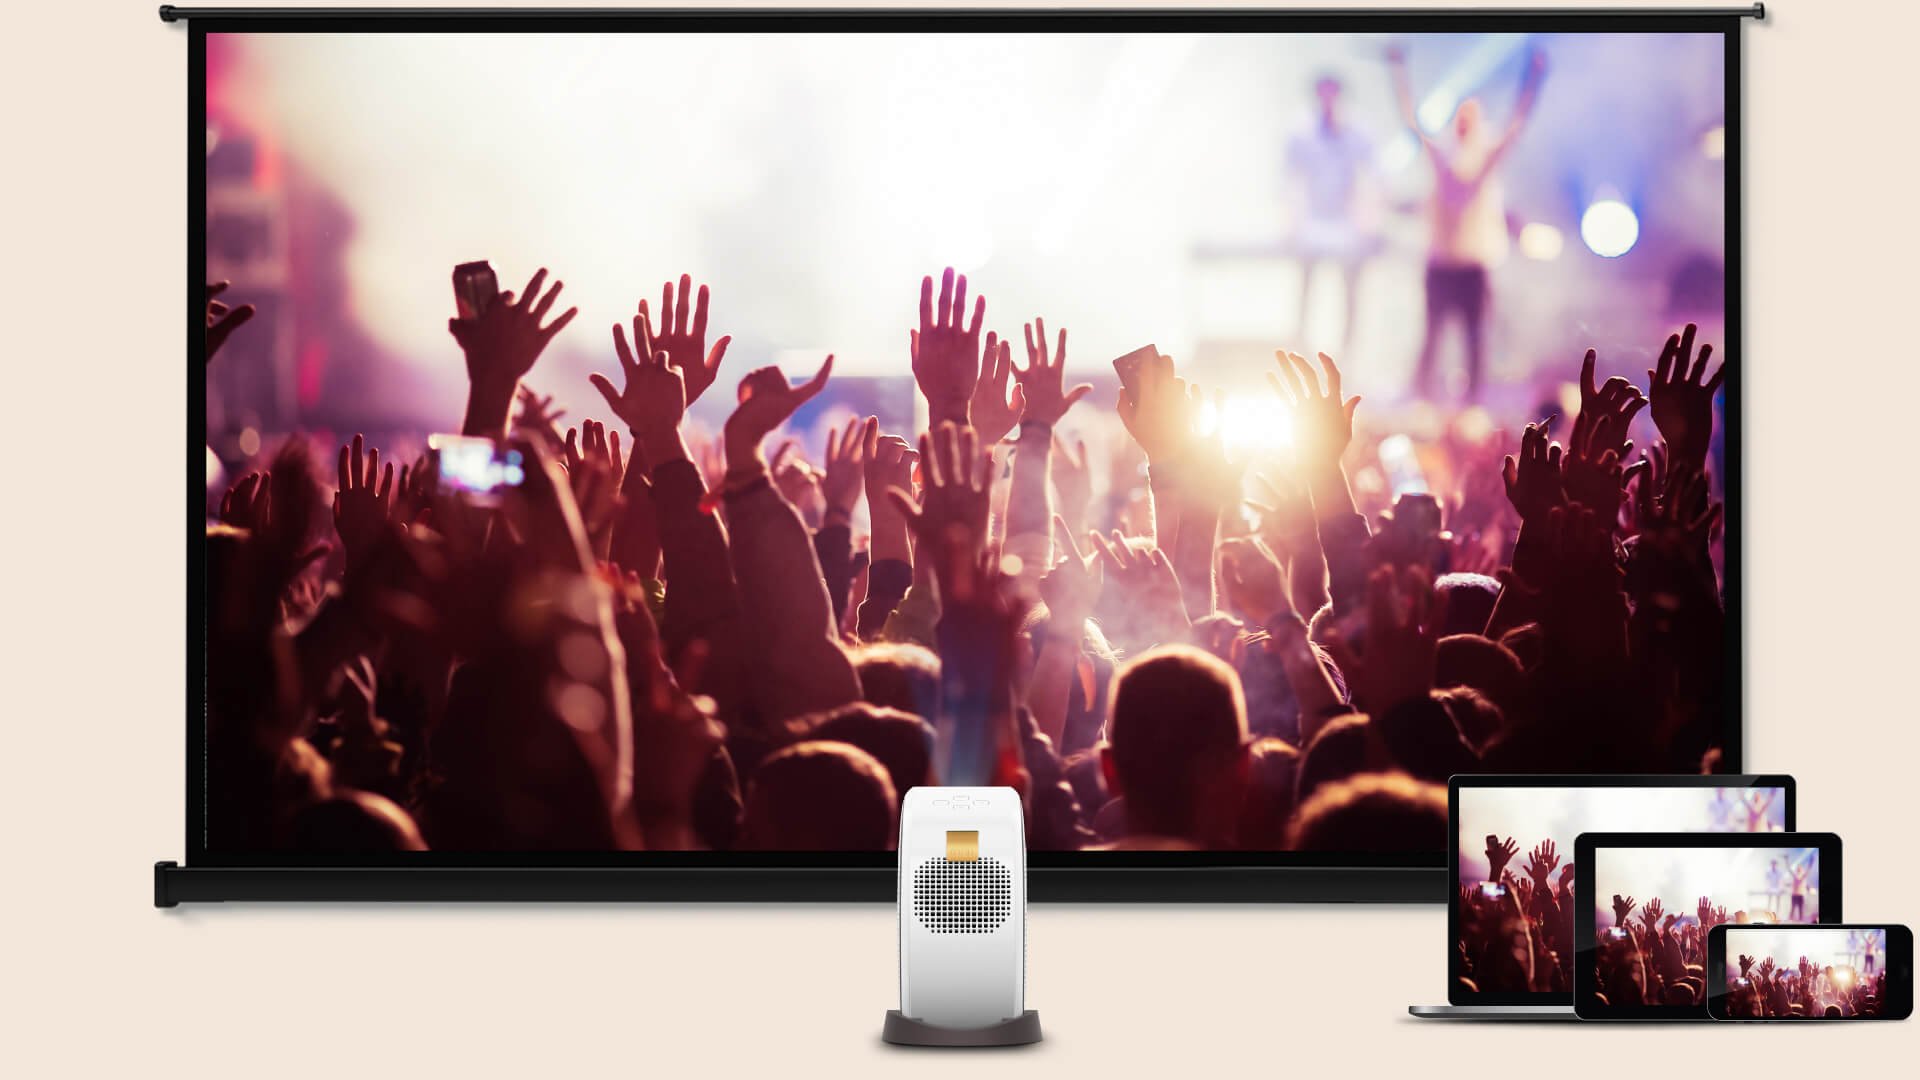 Full support for Apple AirPlay and Google Chromecast